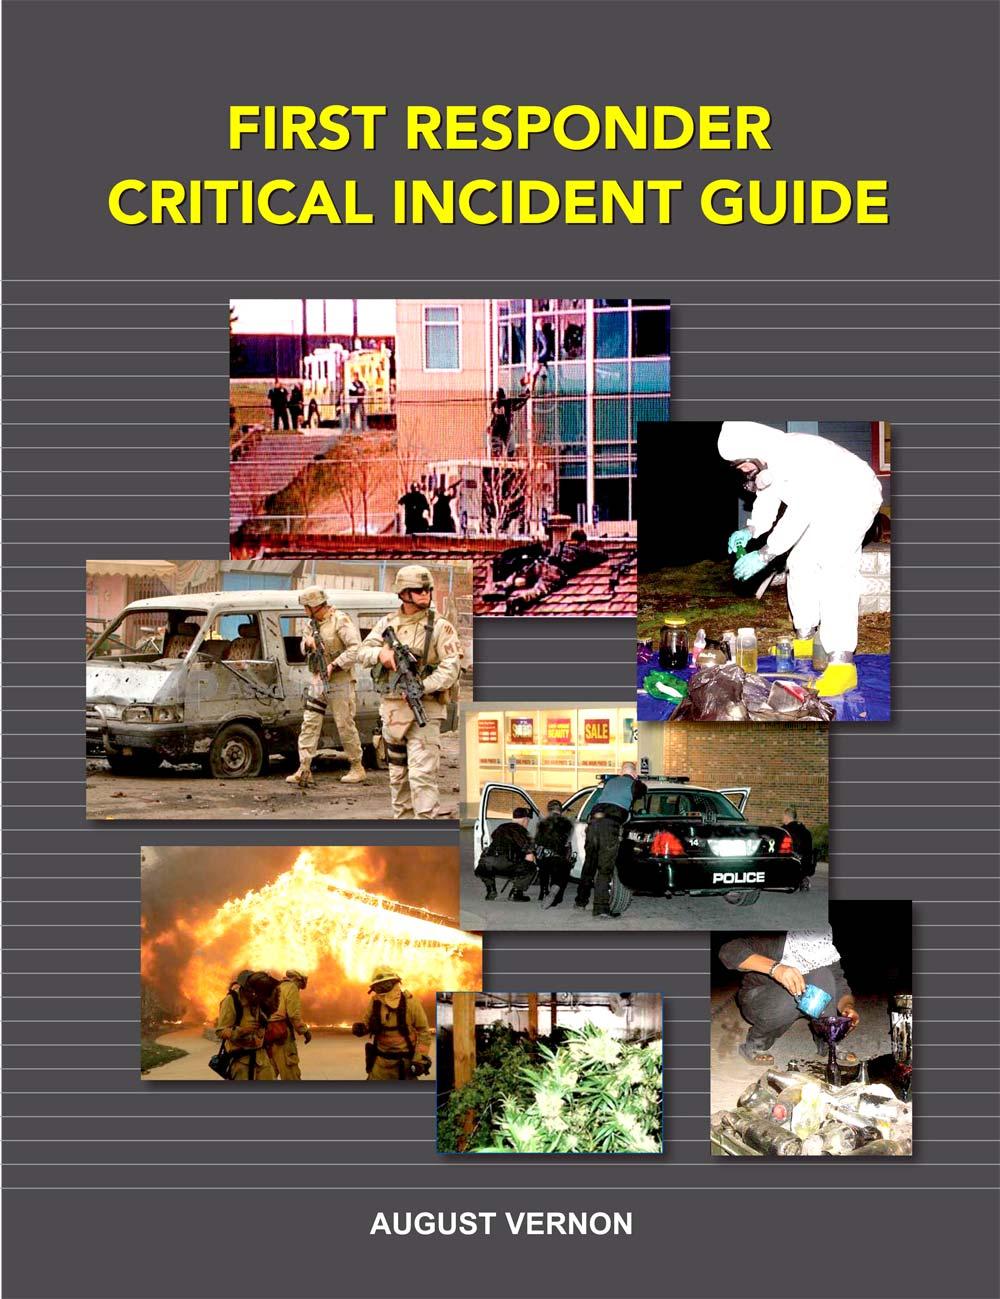 New First Responder Critical Incident Field Guide from